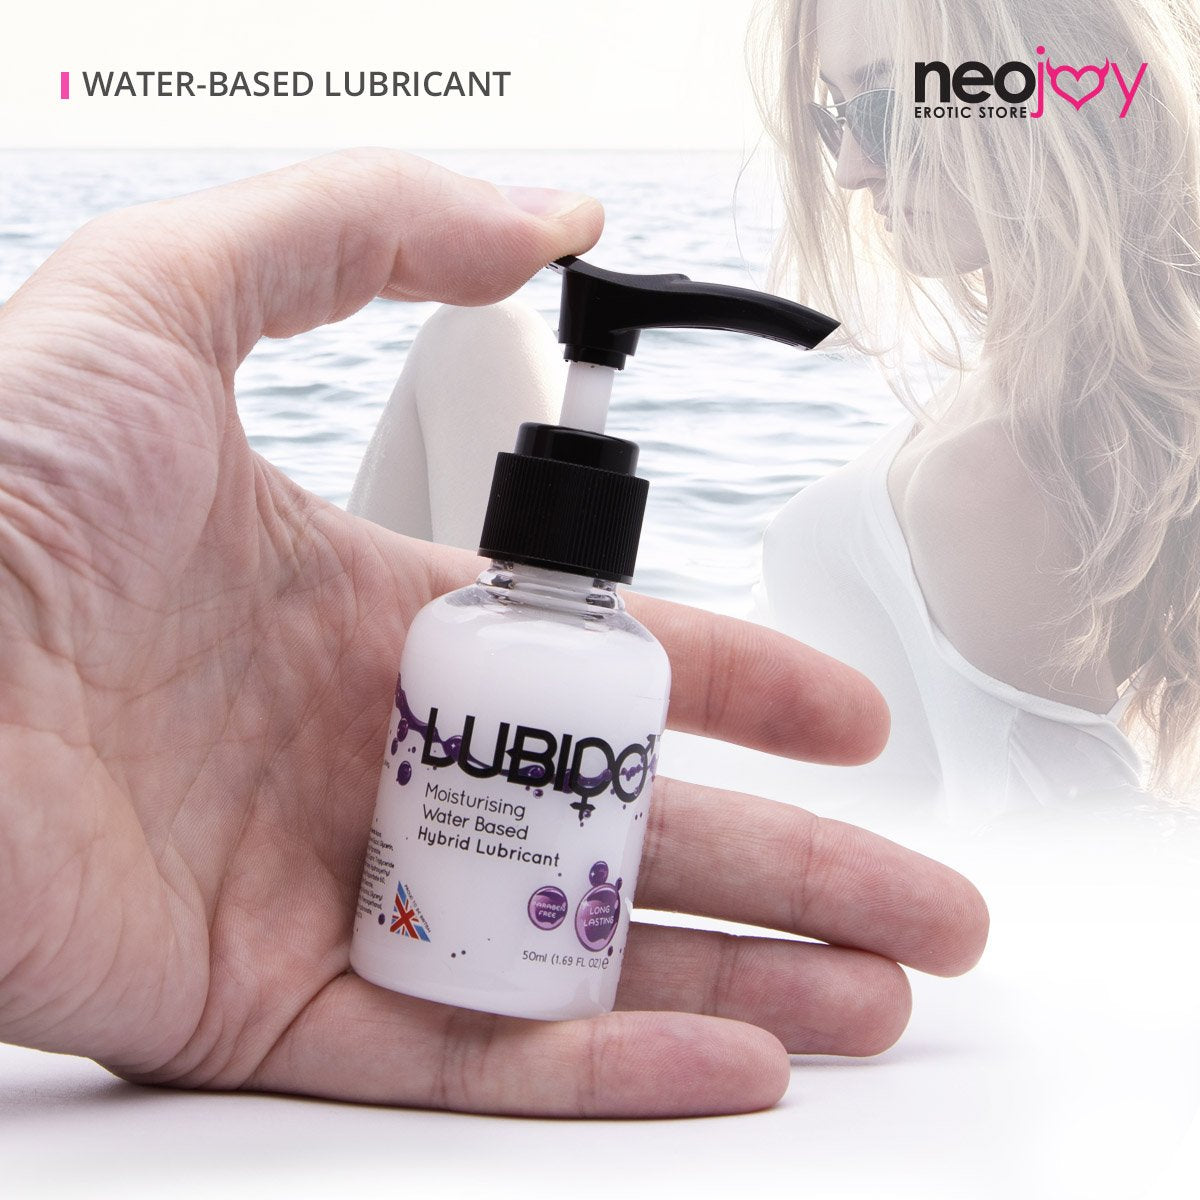 Neojoy Hybrid Lubido Water Based Lubricant With Silicone Touch - 50ml Bottle